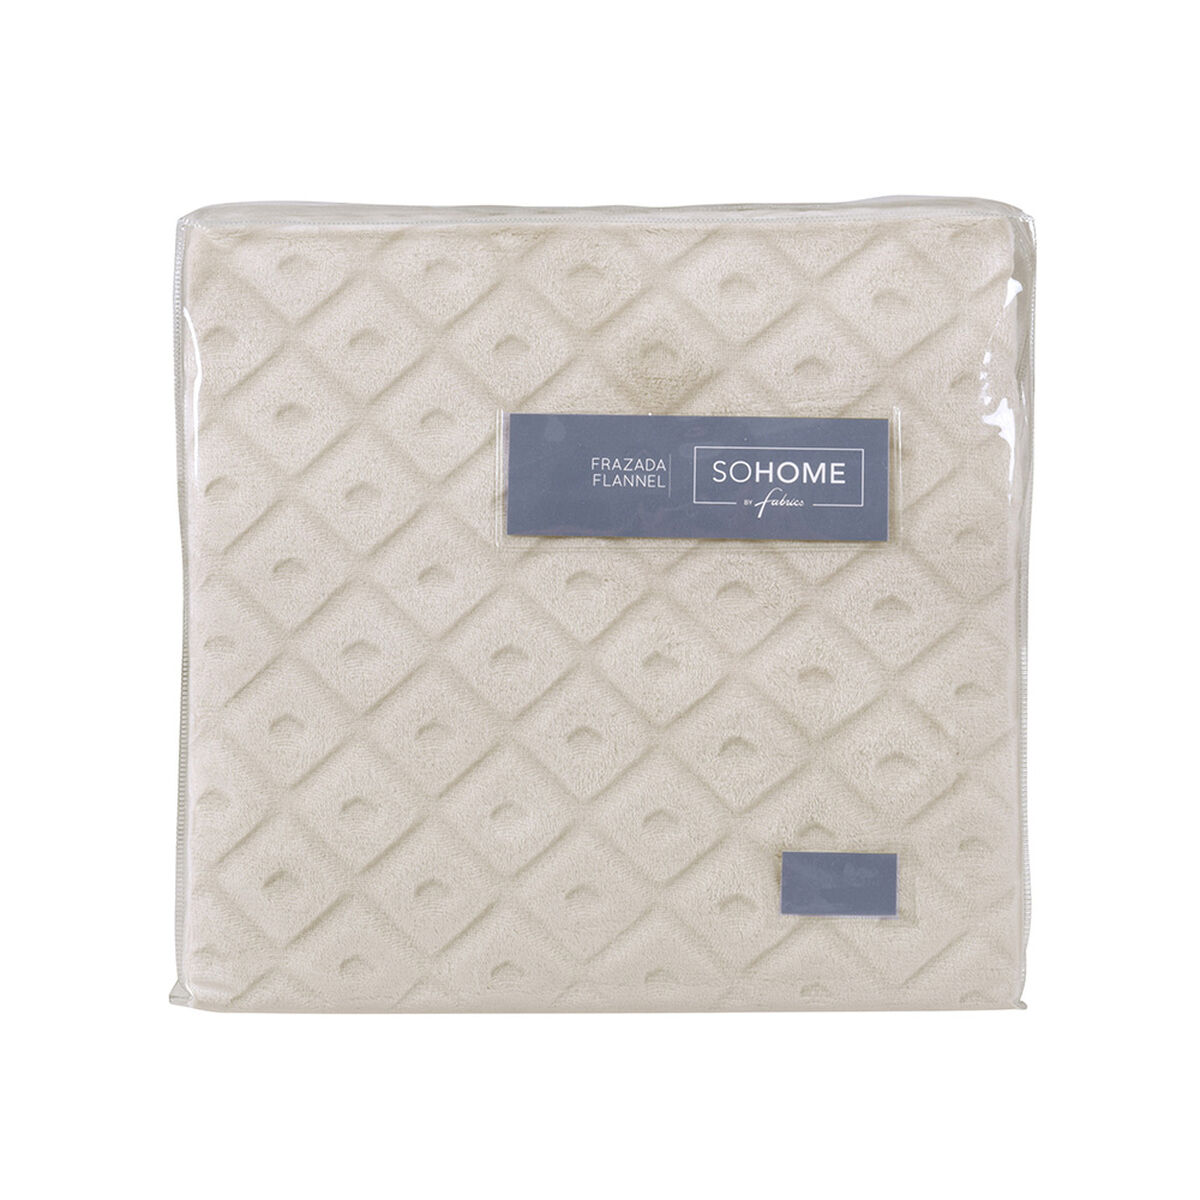 Frazada Emboss Flannel Sohome by Fabrics 1,5 Plazas Abstracto